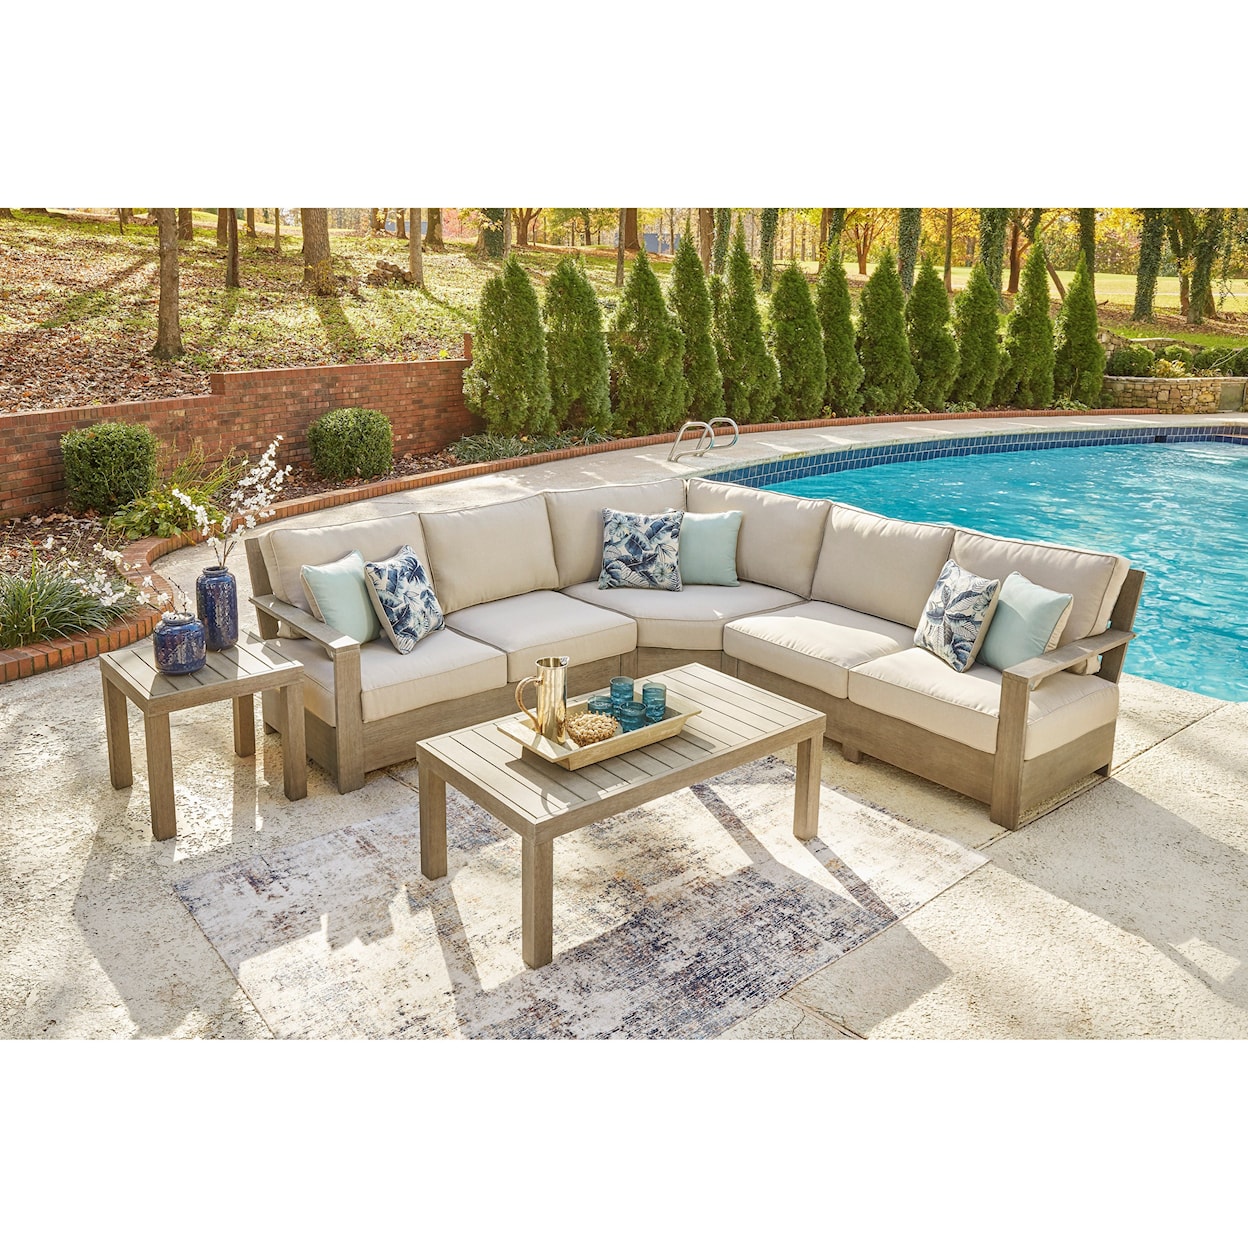 Benchcraft Silo Point Outdoor Sectional Set with Tables